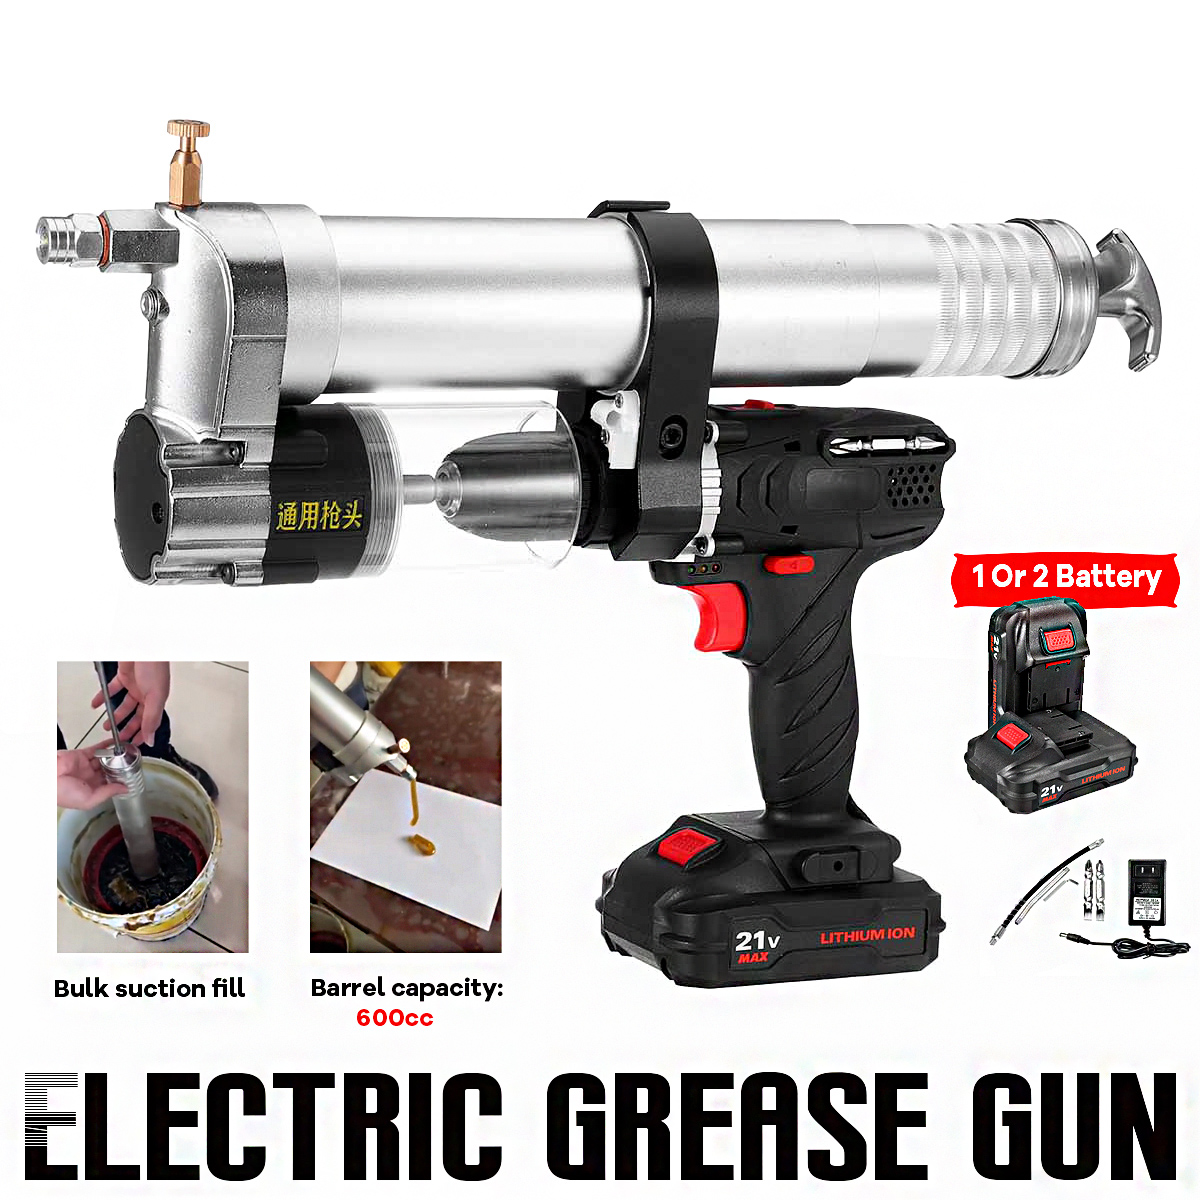 21V-Electric-Grease-Guns-W-Electric-Drill-High-Pressure-Butter-Portable-Excavator-Refueling-Tool-W-1-1851027-1